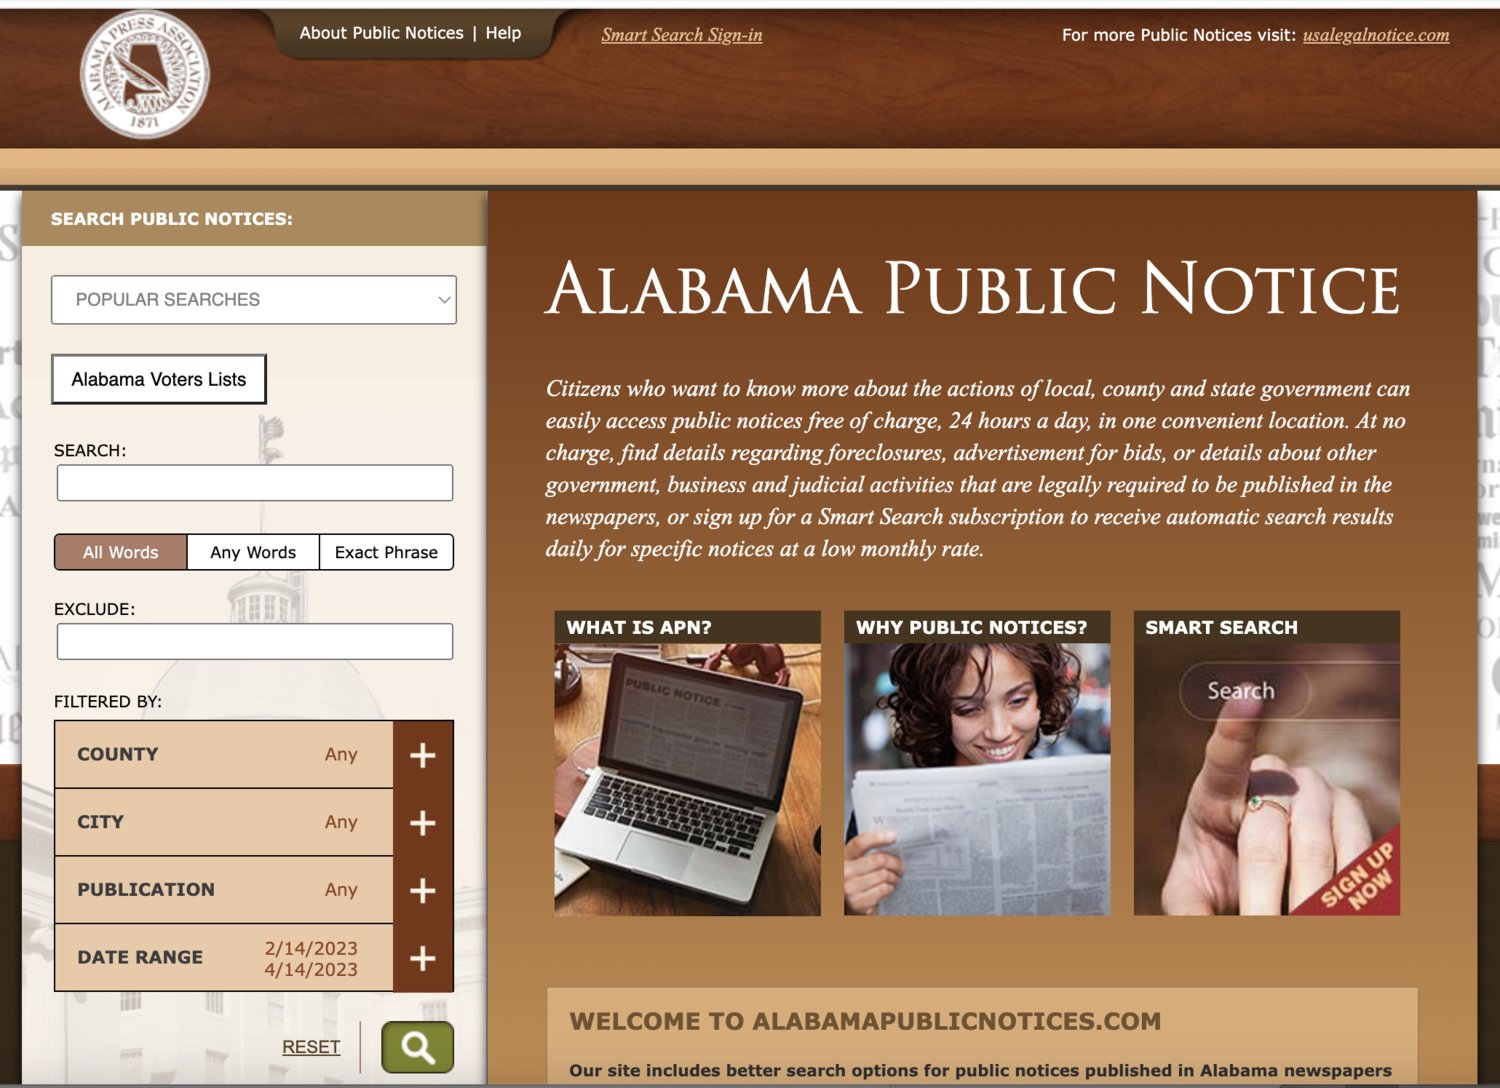 Public notices can be searched statewide at AlabamaPublicNotices.com